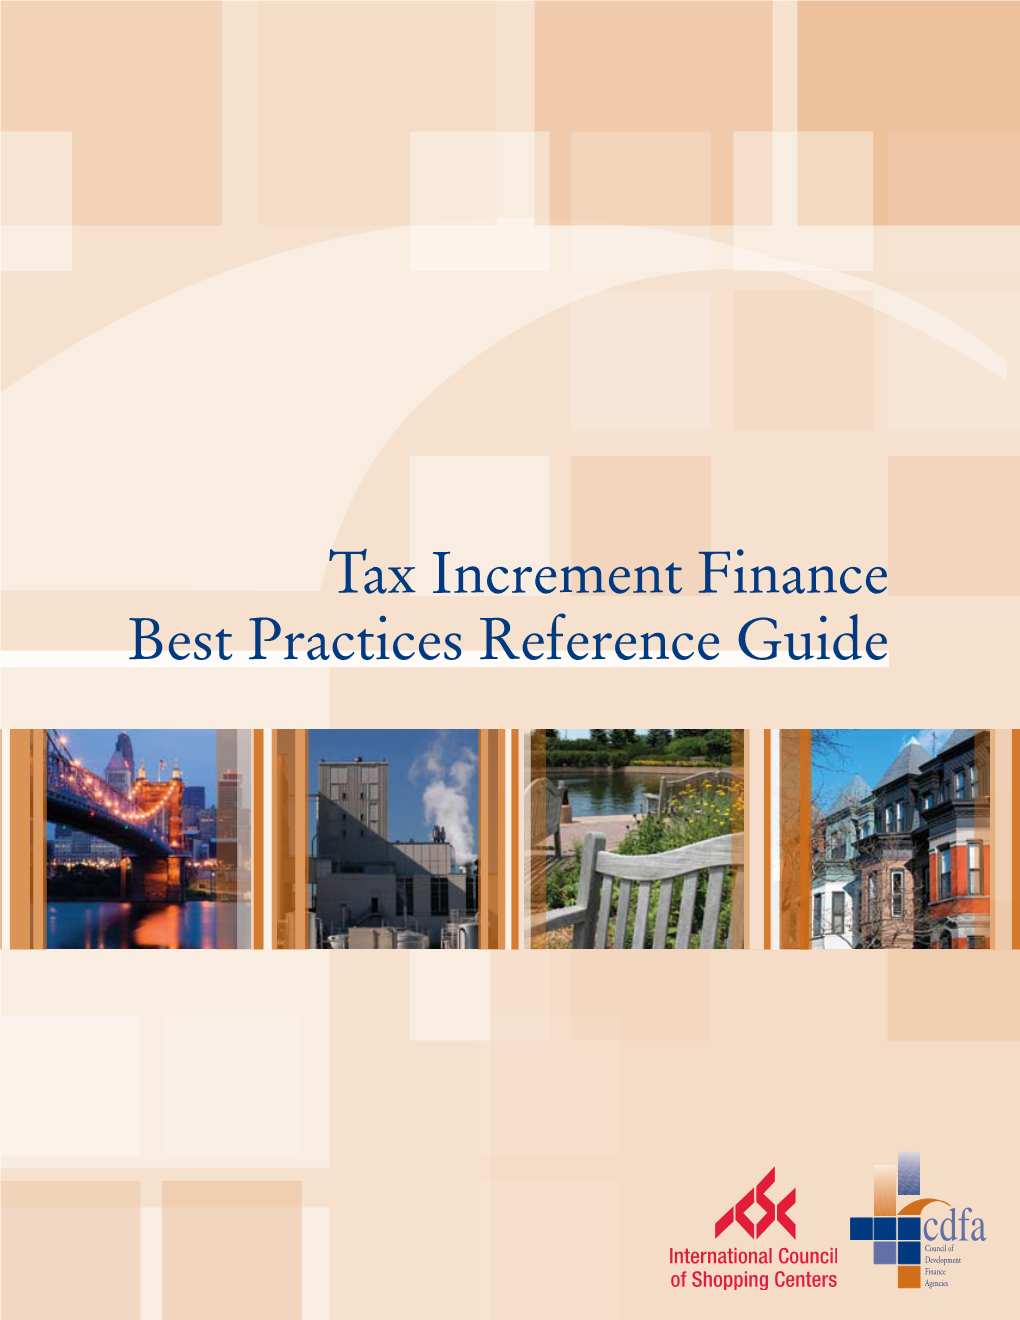 Tax Increment Finance Best Practices Reference Guide